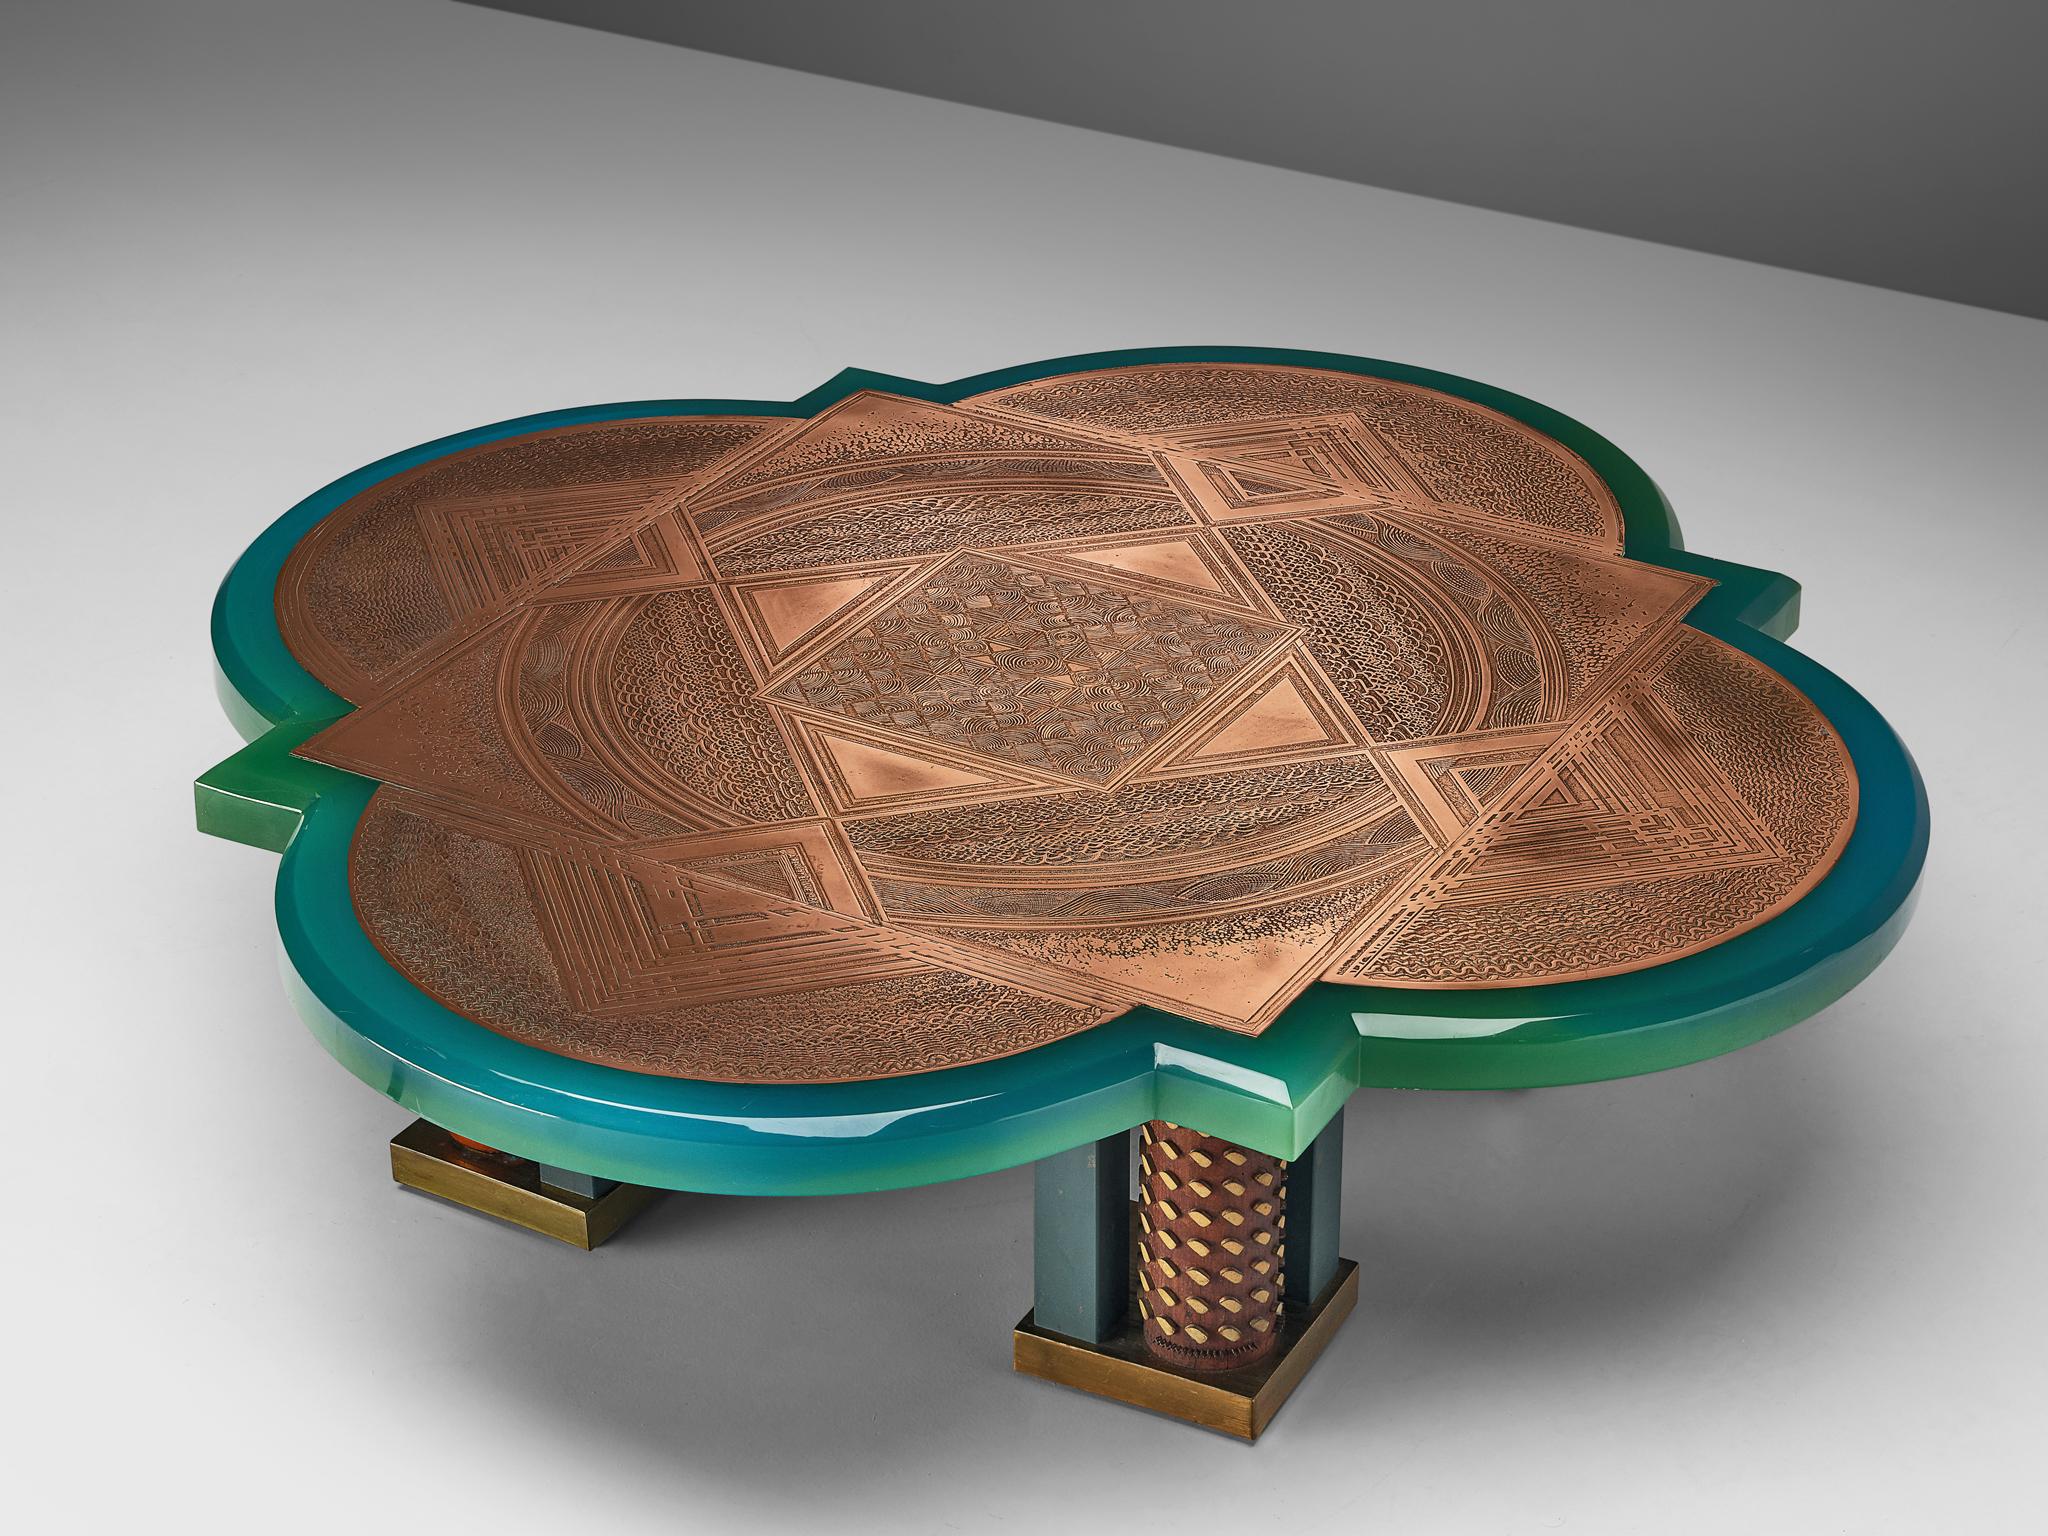 Unique Armand Jonckers Coffee Table in Green Resin and Copper  For Sale 3